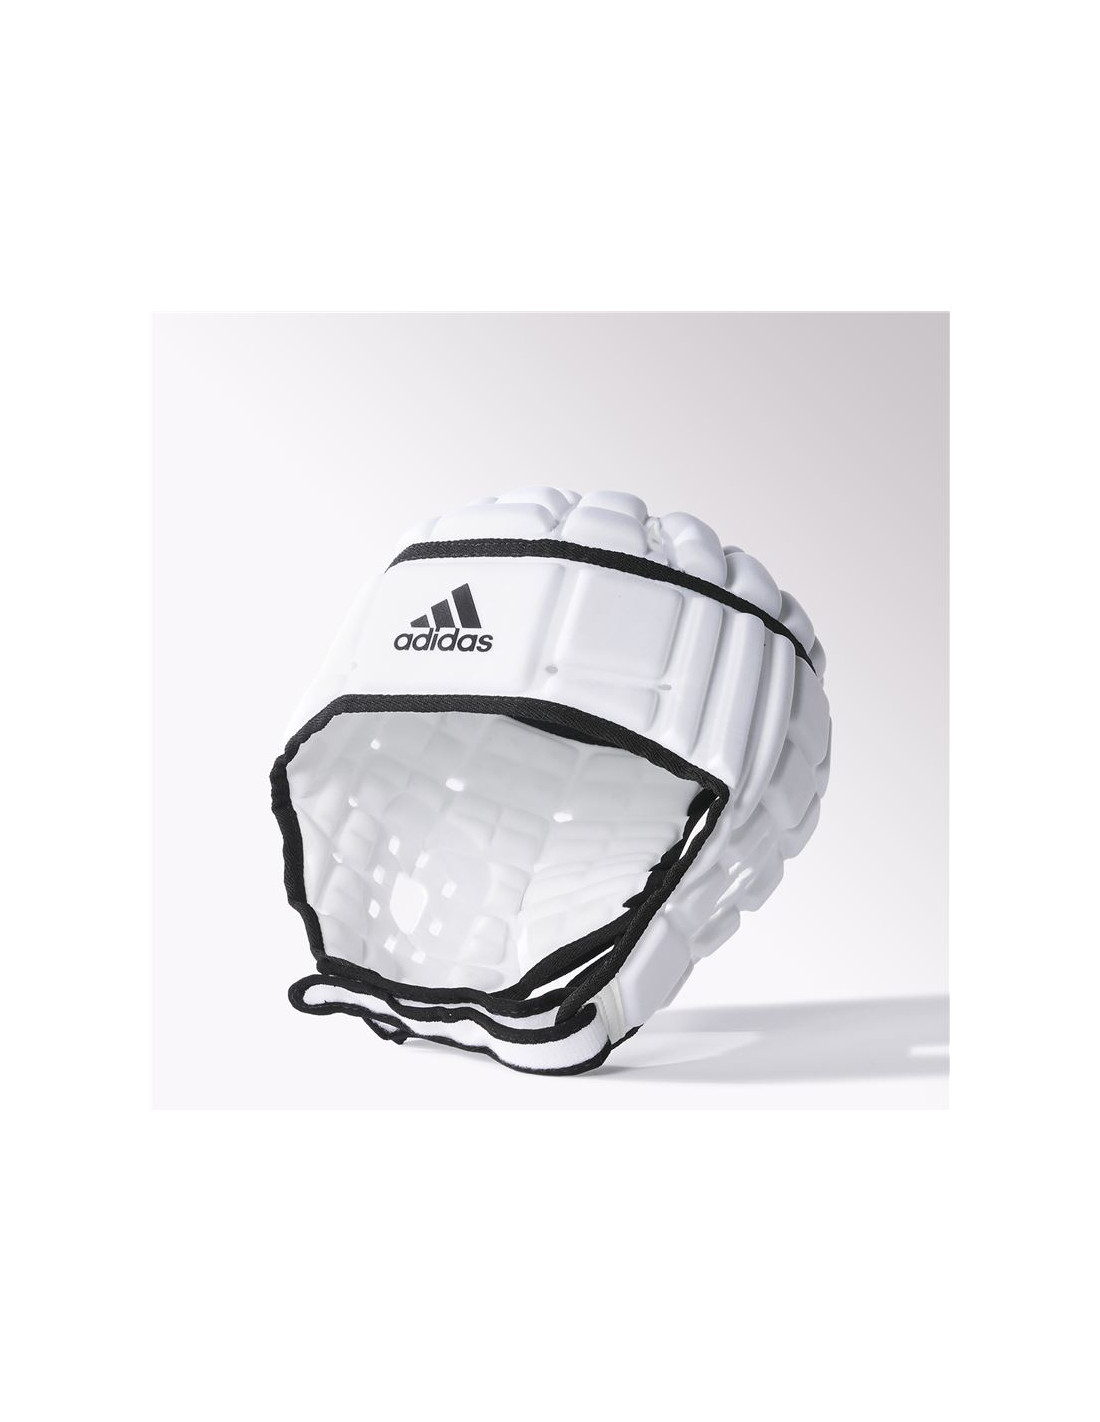 Casco Protector Rugby Adidas